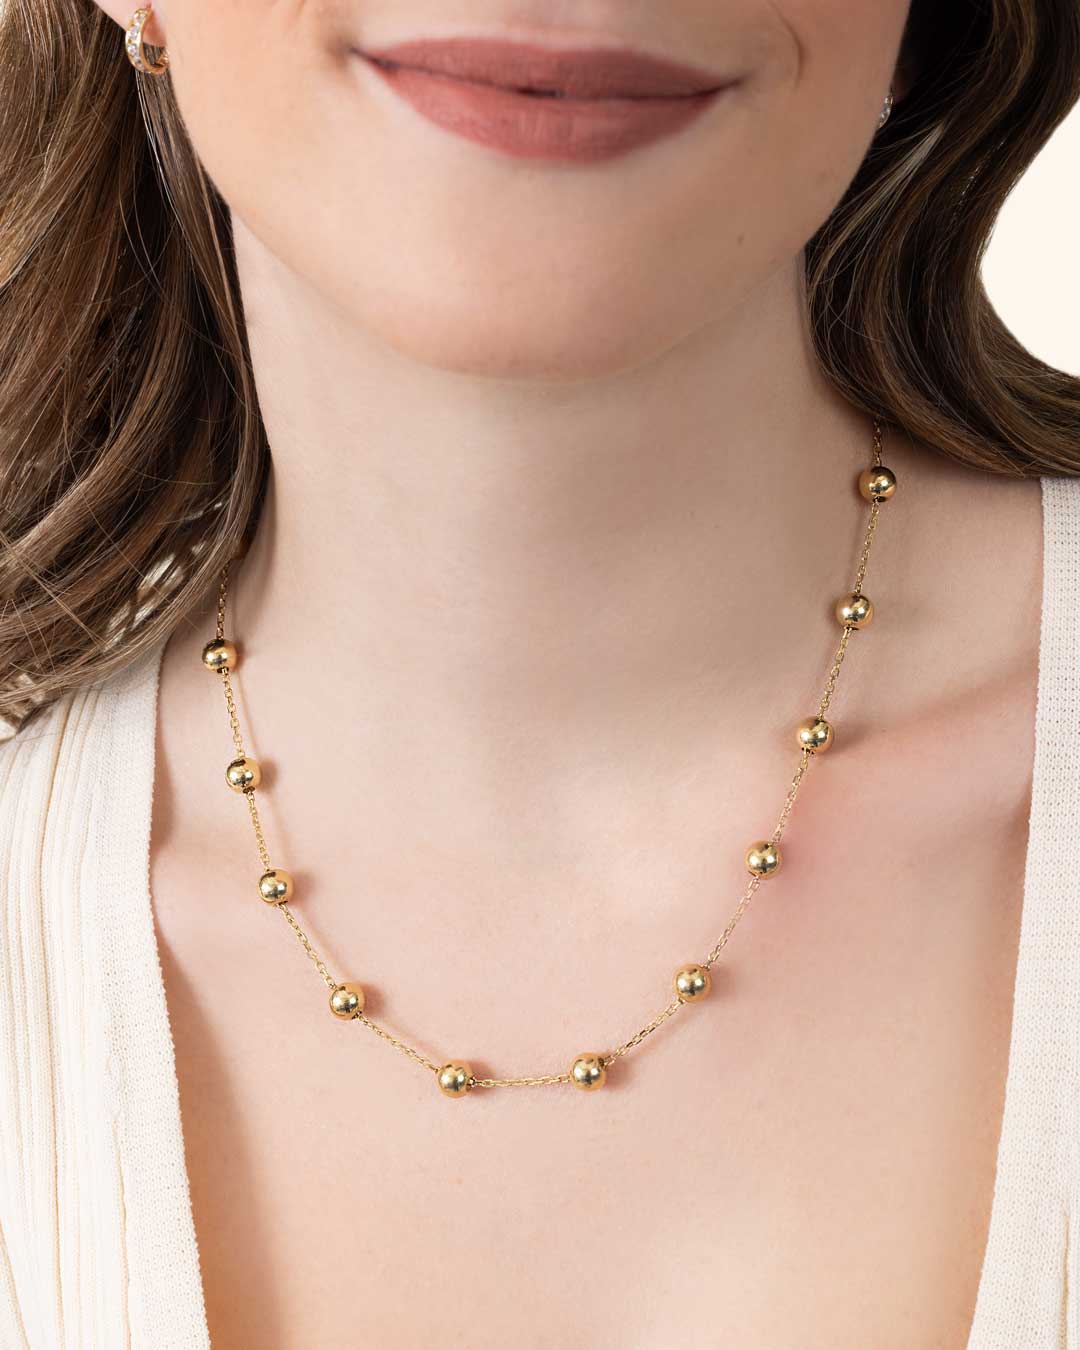 14K GOLD BEAD NECKLACE